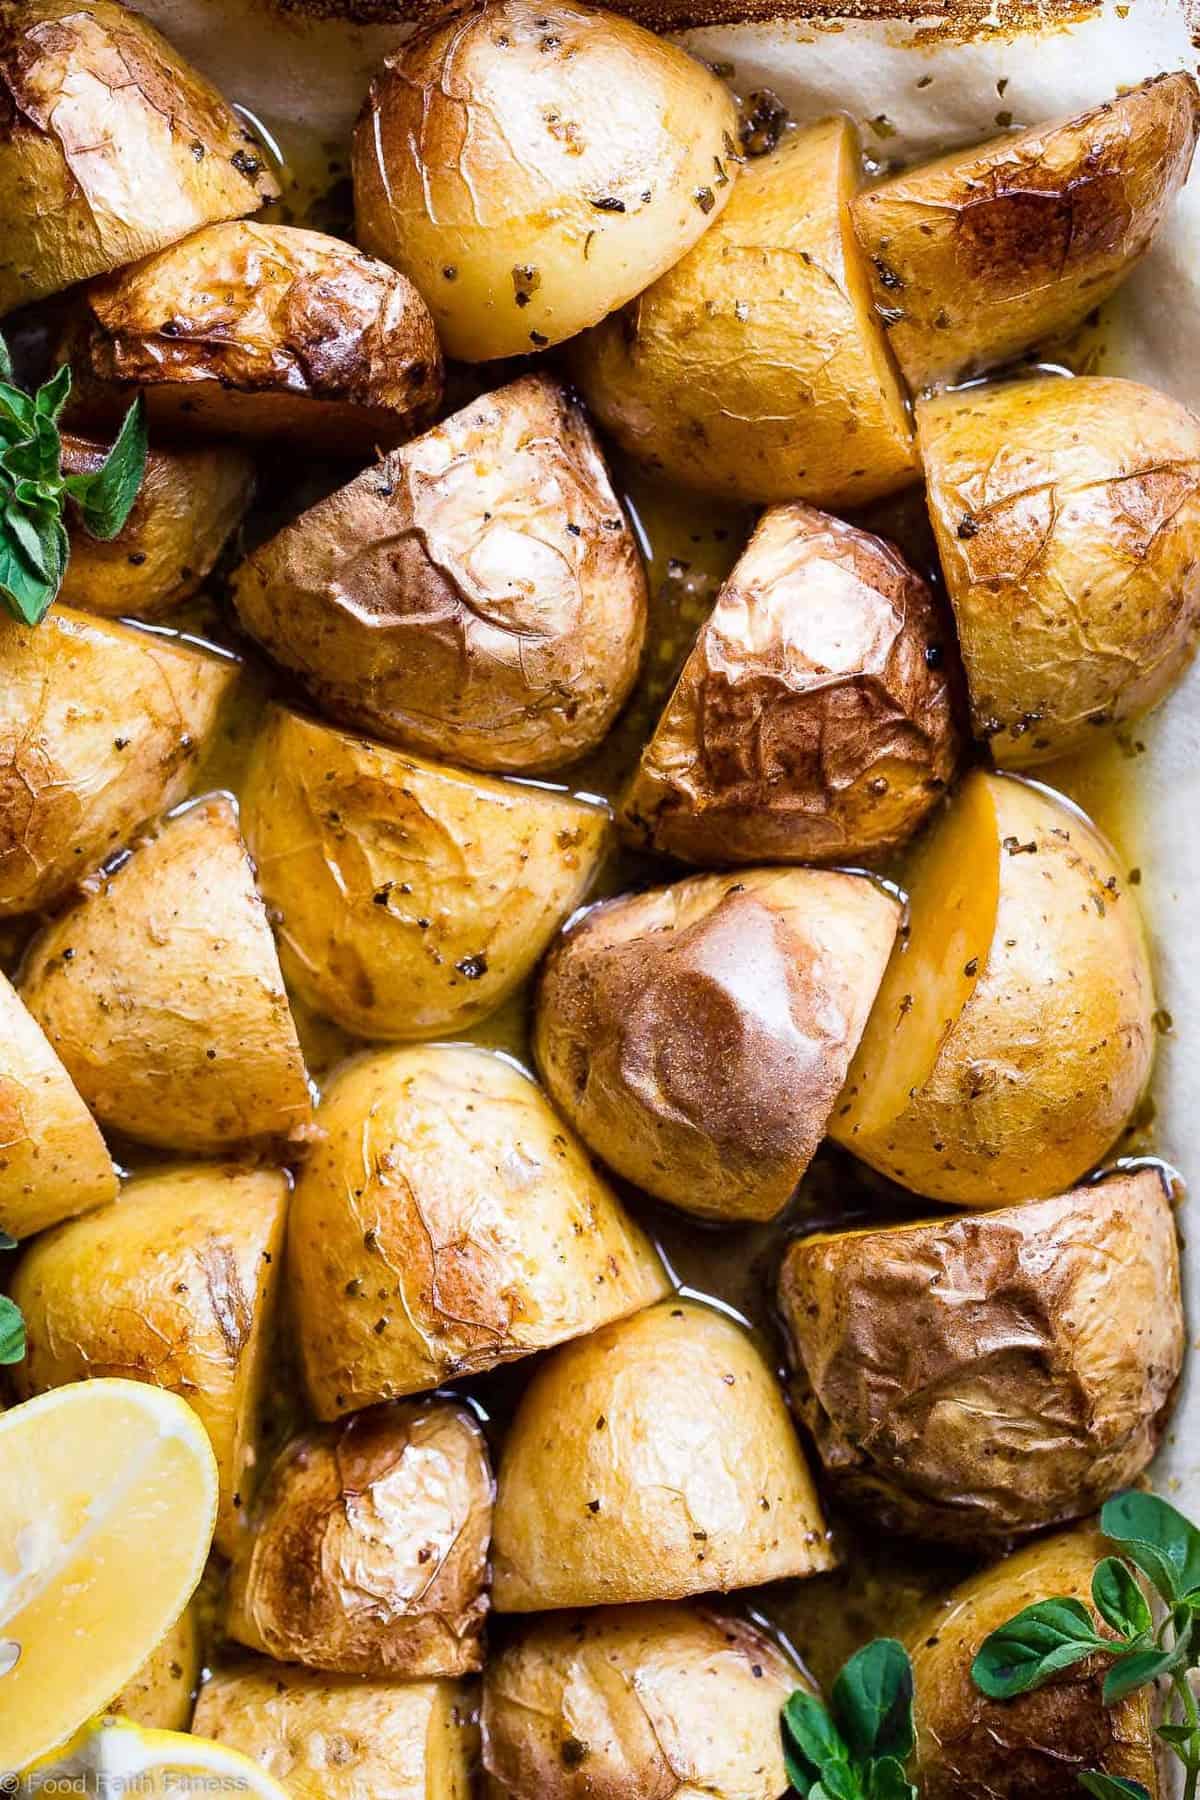 Oven Roasted Lemon Greek Potatoes - These are the BEST Oven Roasted Lemon Greek Potatoes! Tangy, zesty and so packed with flavor you will make them all the time! SO easy, whole30 complaint and vegan/ gluten free too! | #Foodfaithfitness | #Glutenfree #Vegan #Whole30 #Healthy #Dairyfree